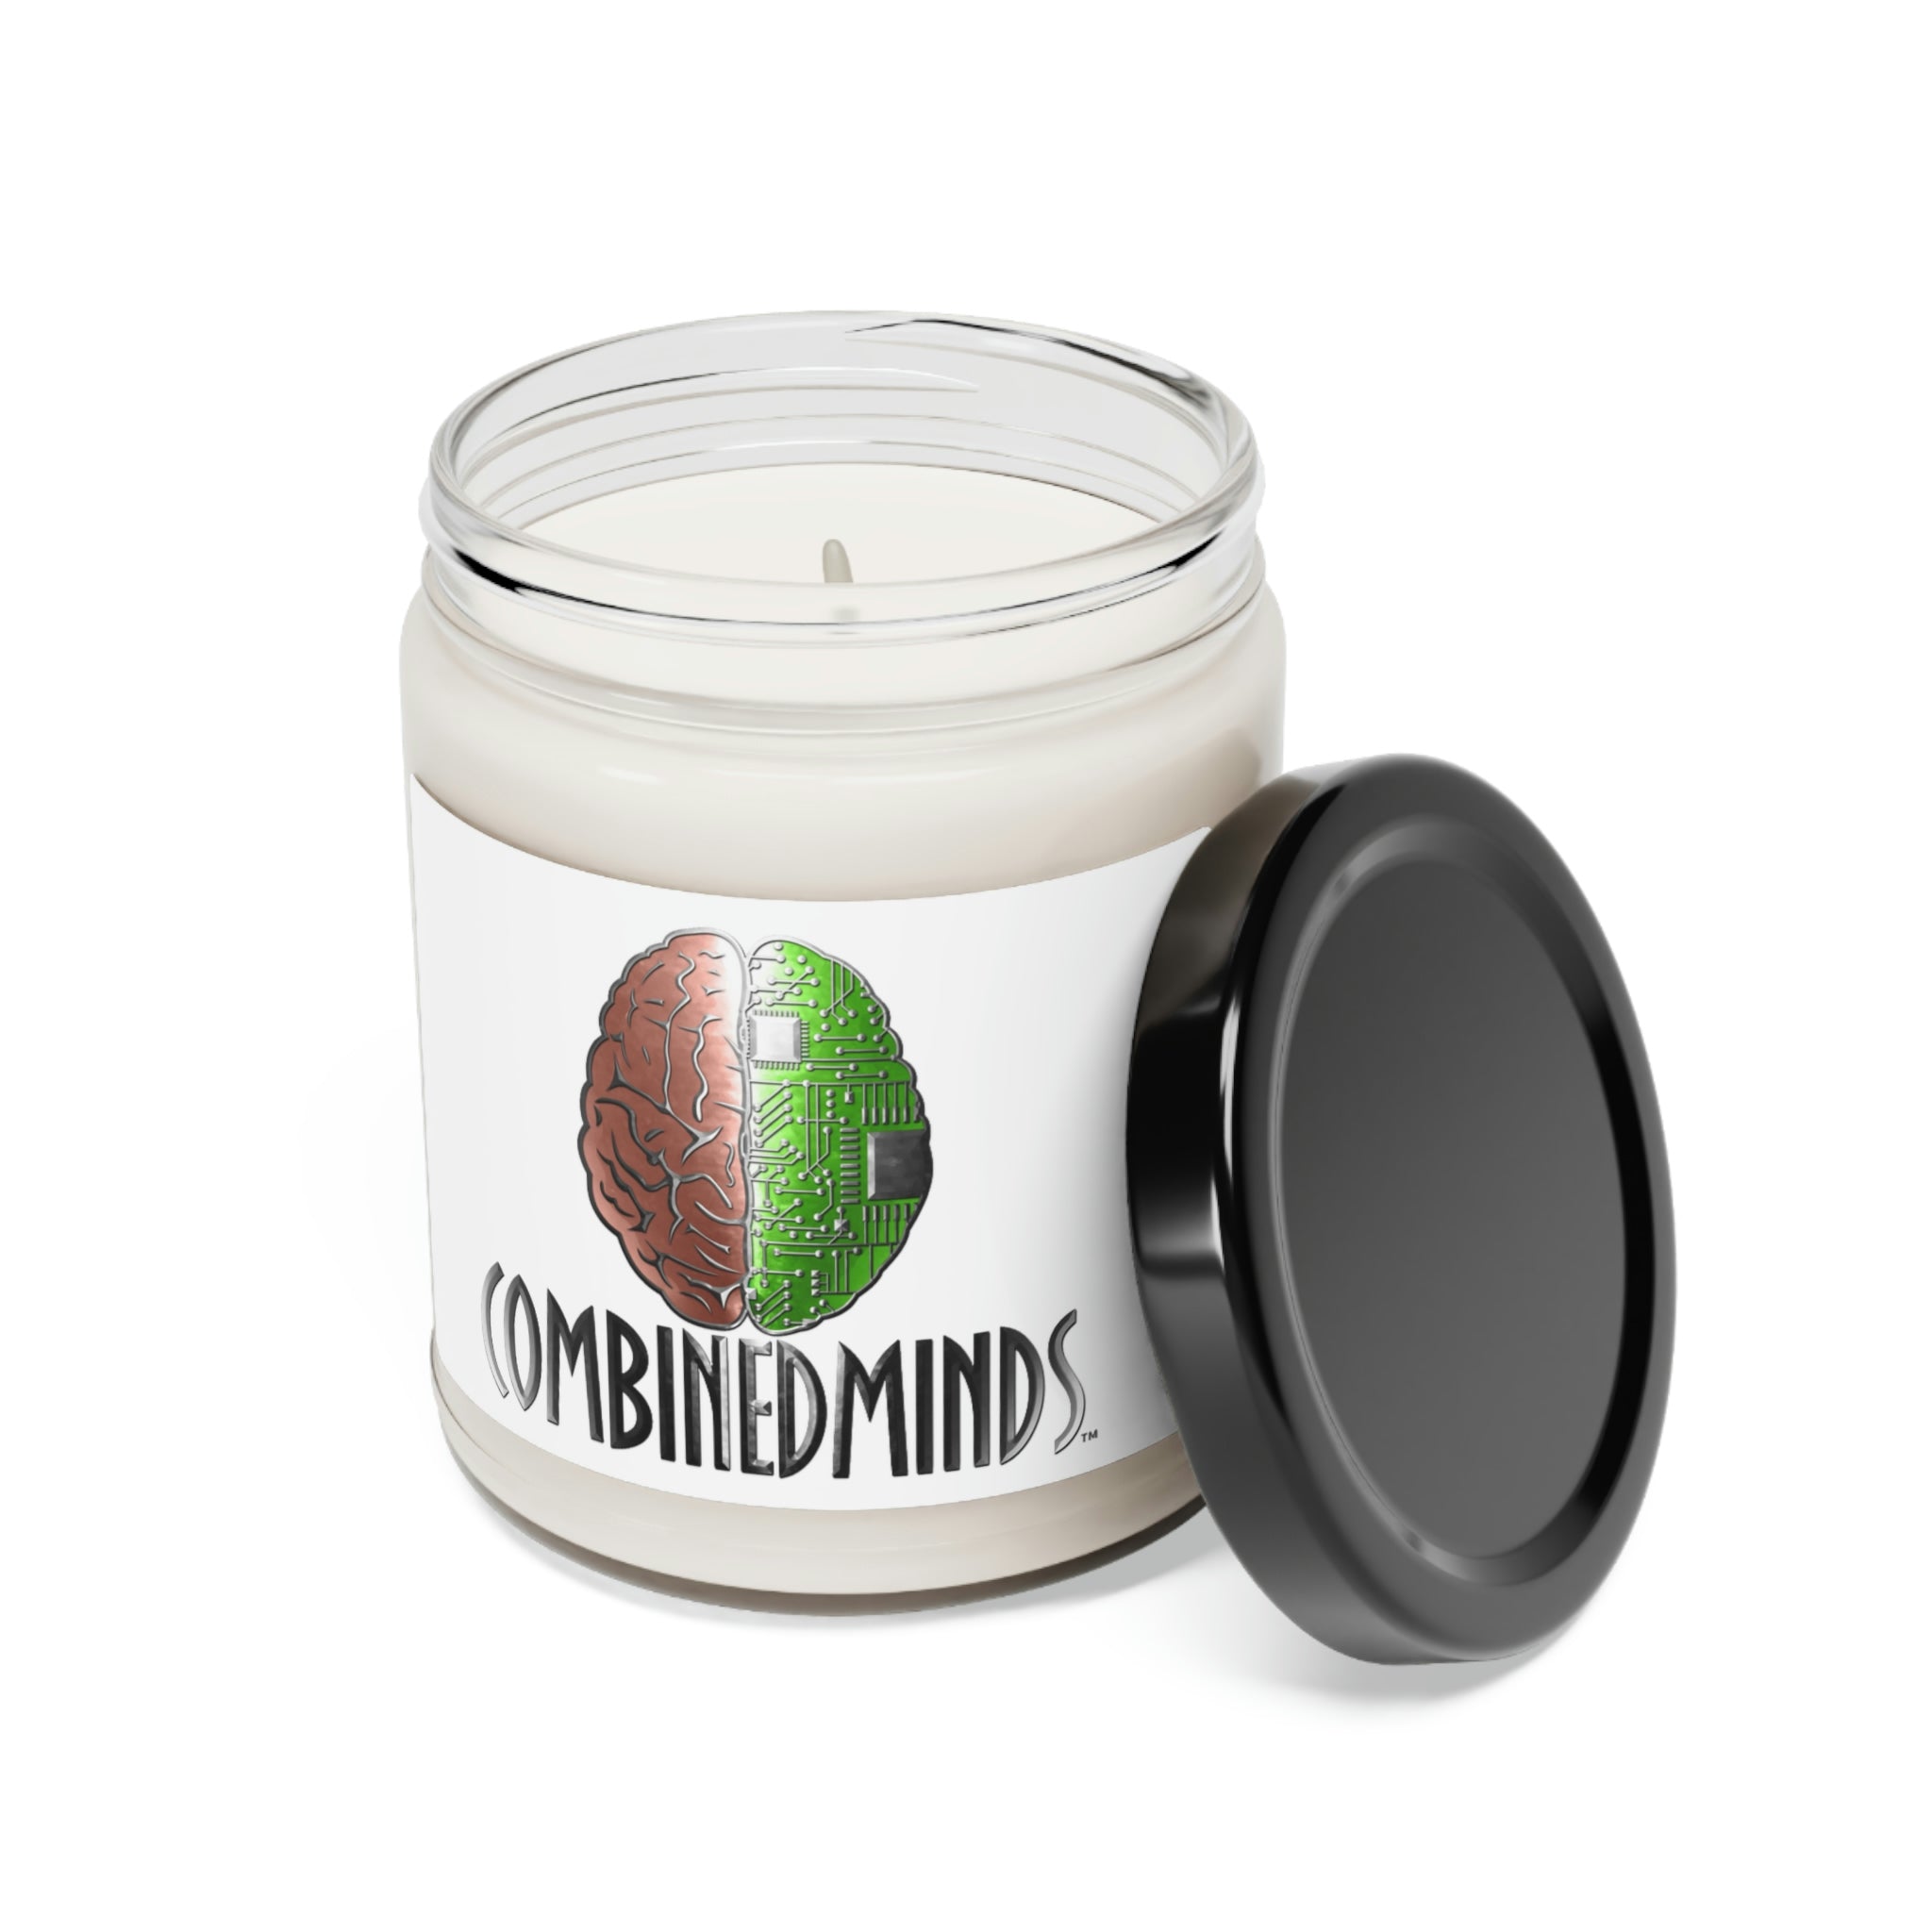 CombinedMinds Scented Soy Candle, 9oz